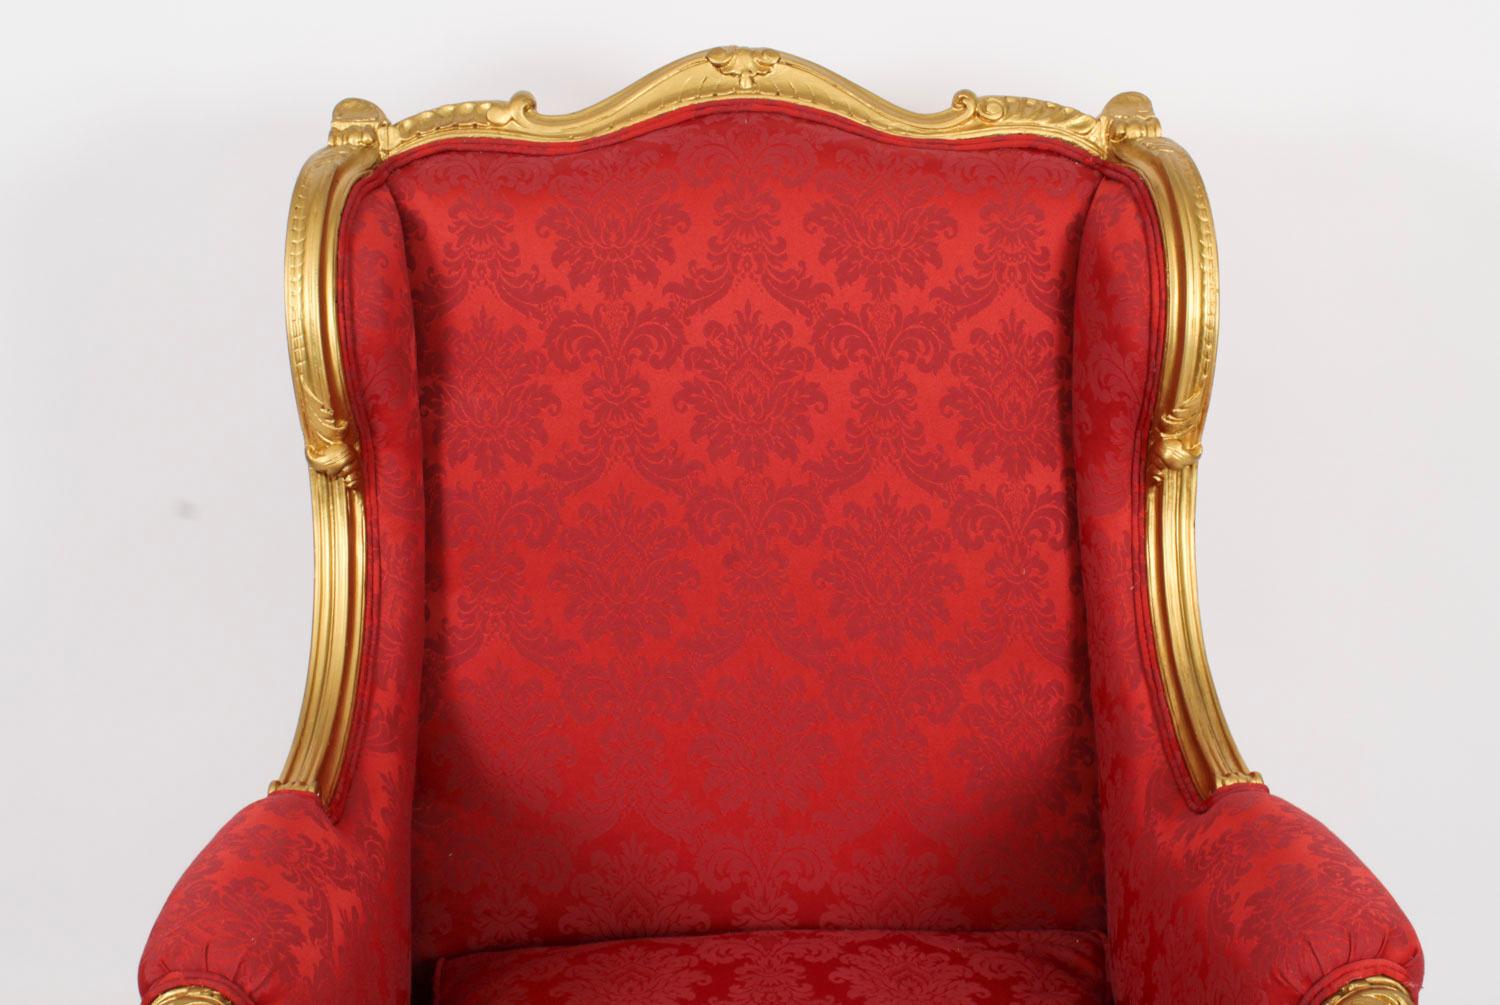 French Antique Louis XV Revival Giltwood Shaped Bergere Armchair, 19th Century For Sale